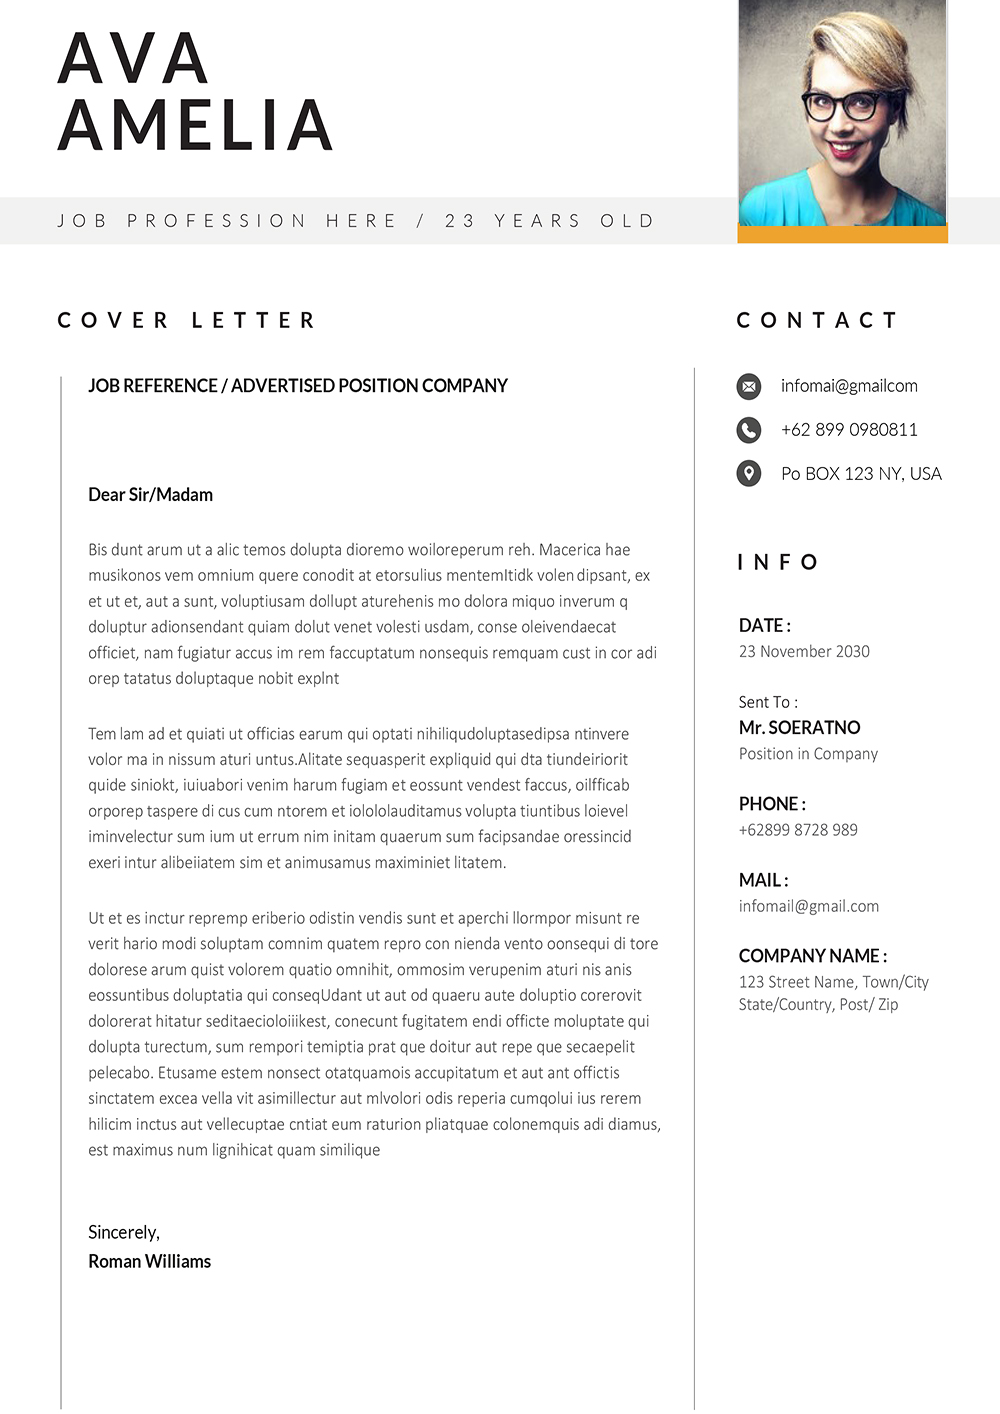 ATS Friendly Cover Letter Template Word Format (DOC/DOCX)